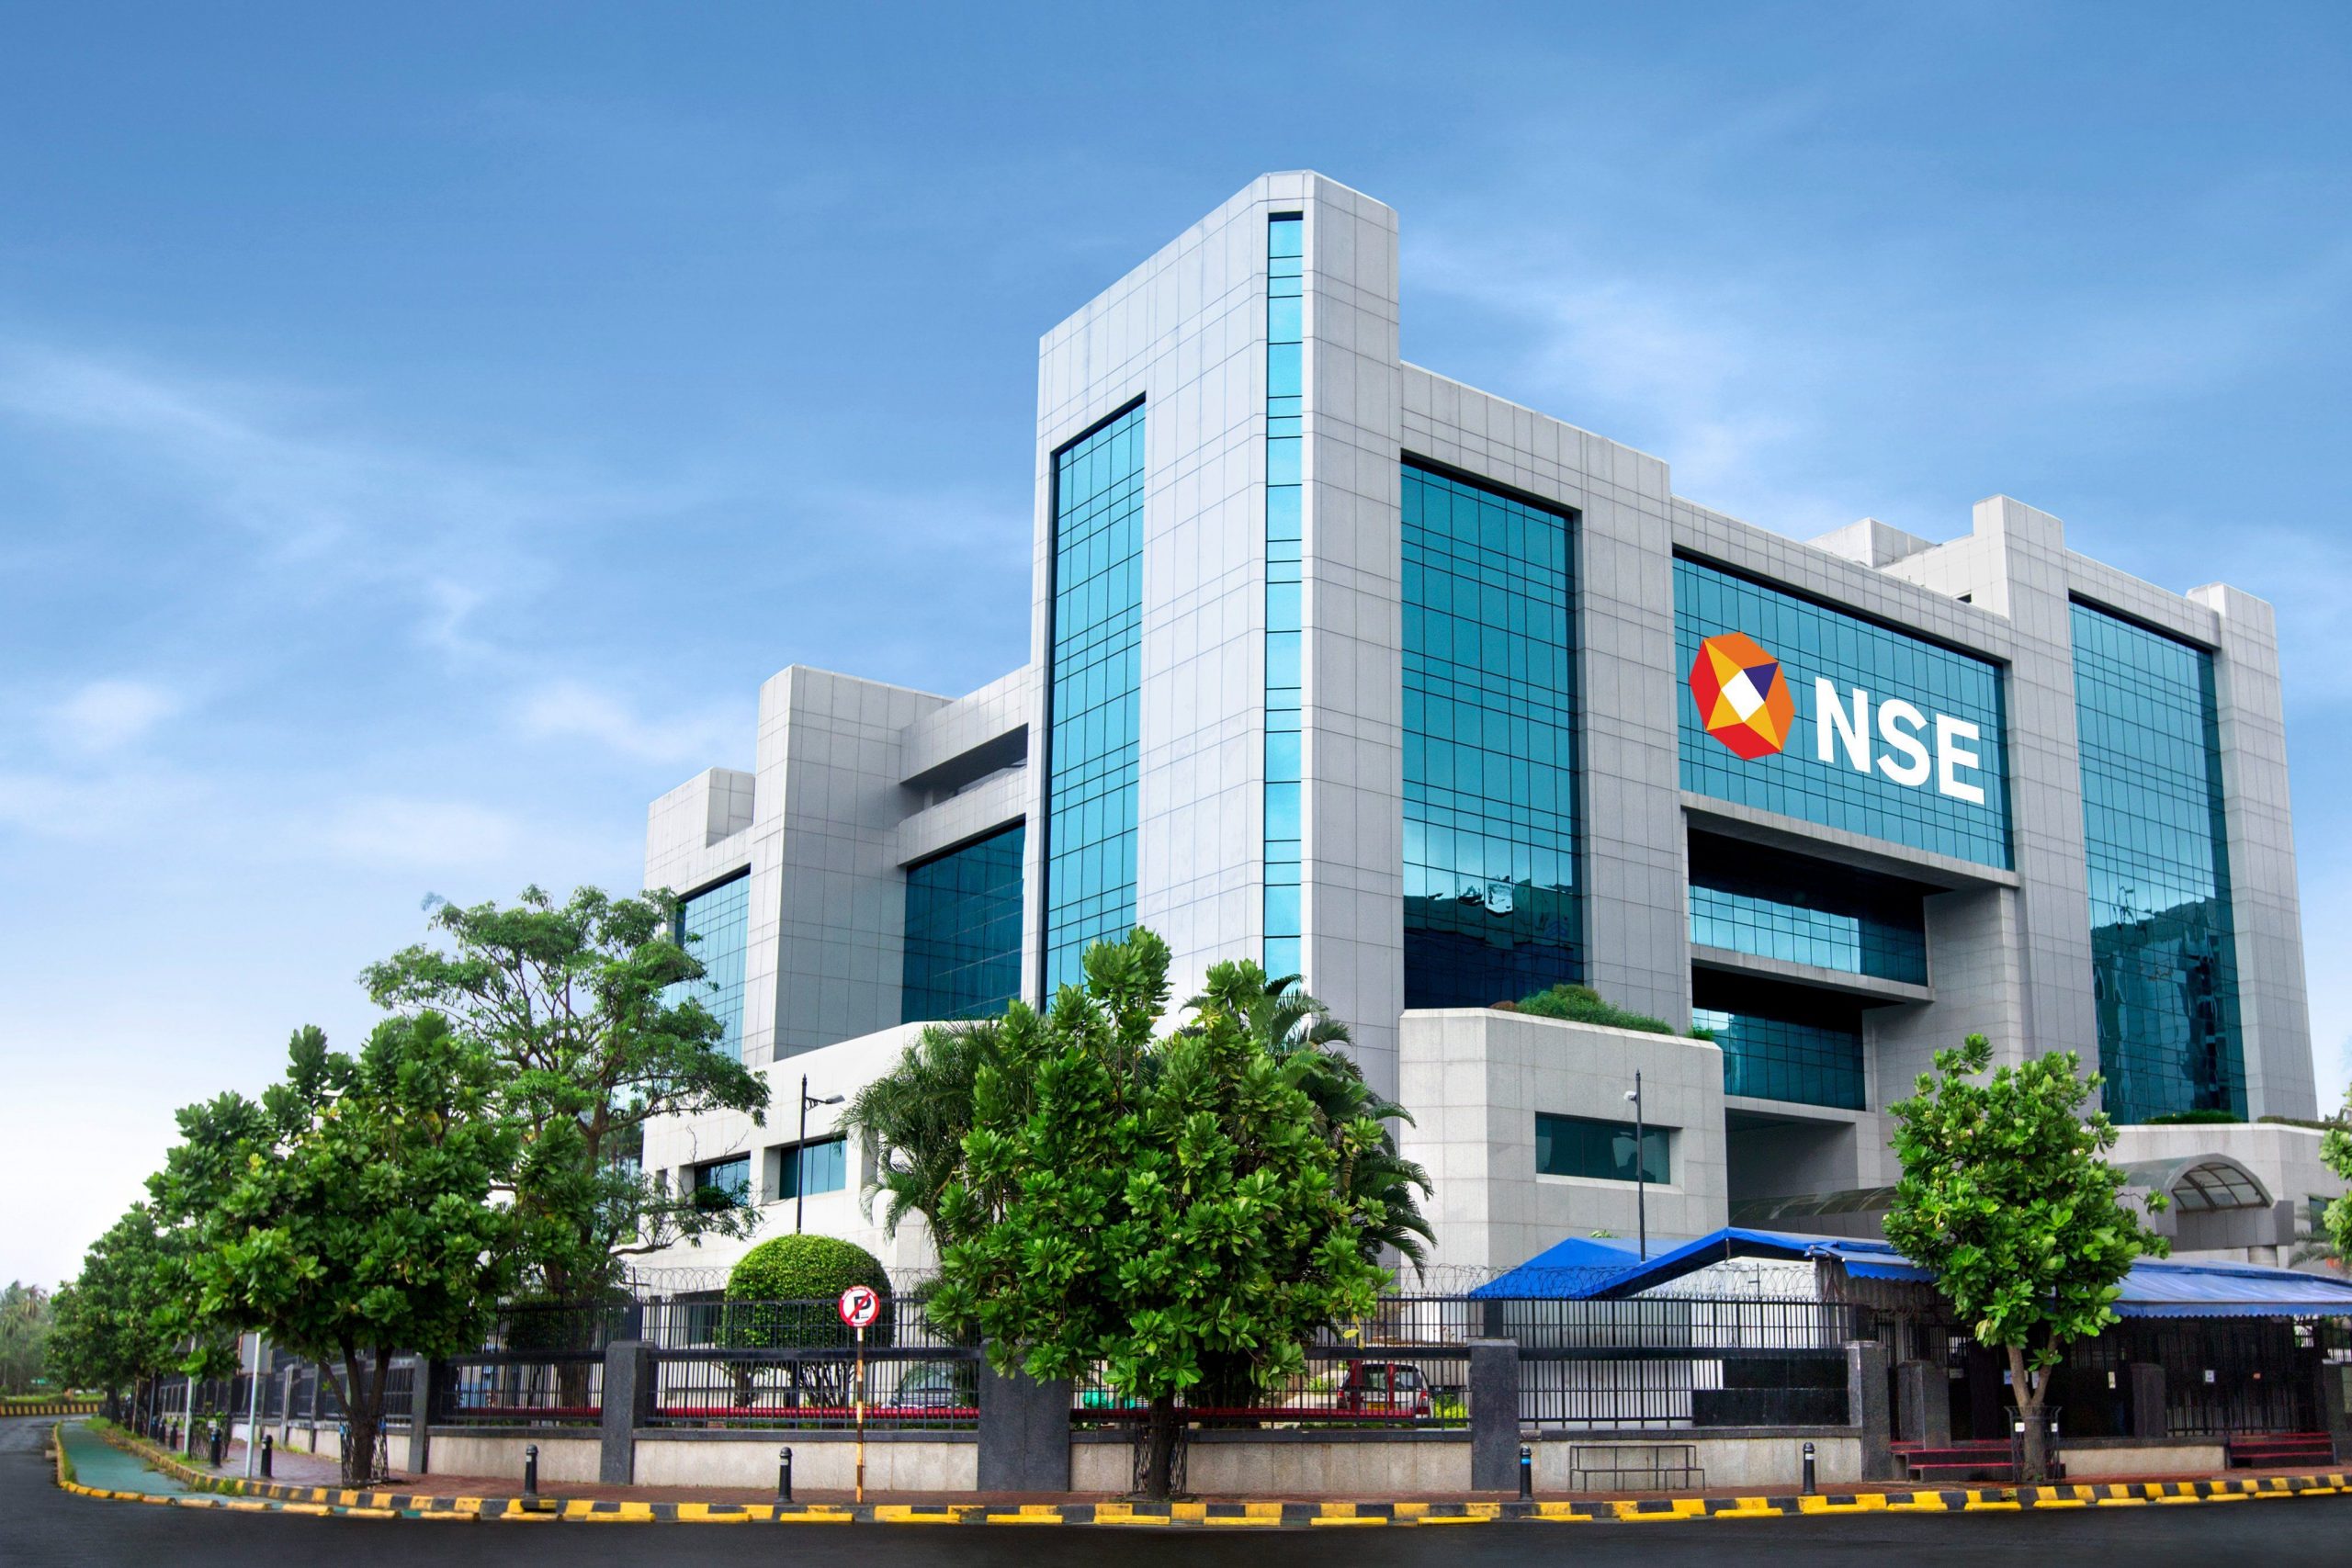 NSE F&O Ban: Escorts is under ban on Friday, August 5, 2022